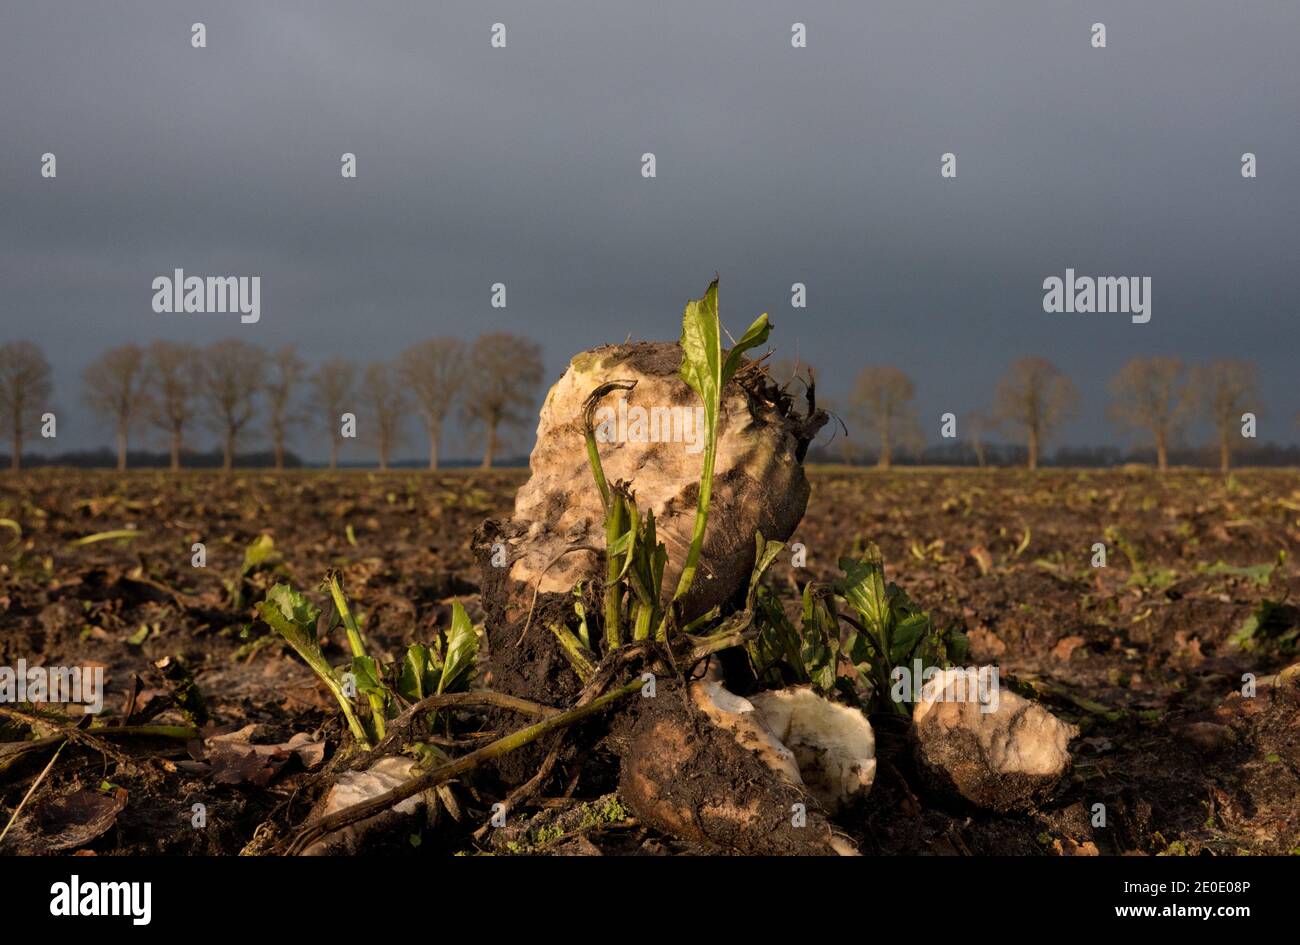 Sugarbeets left on a field after harvest, gnawed by mice or rabbits Stock Photo